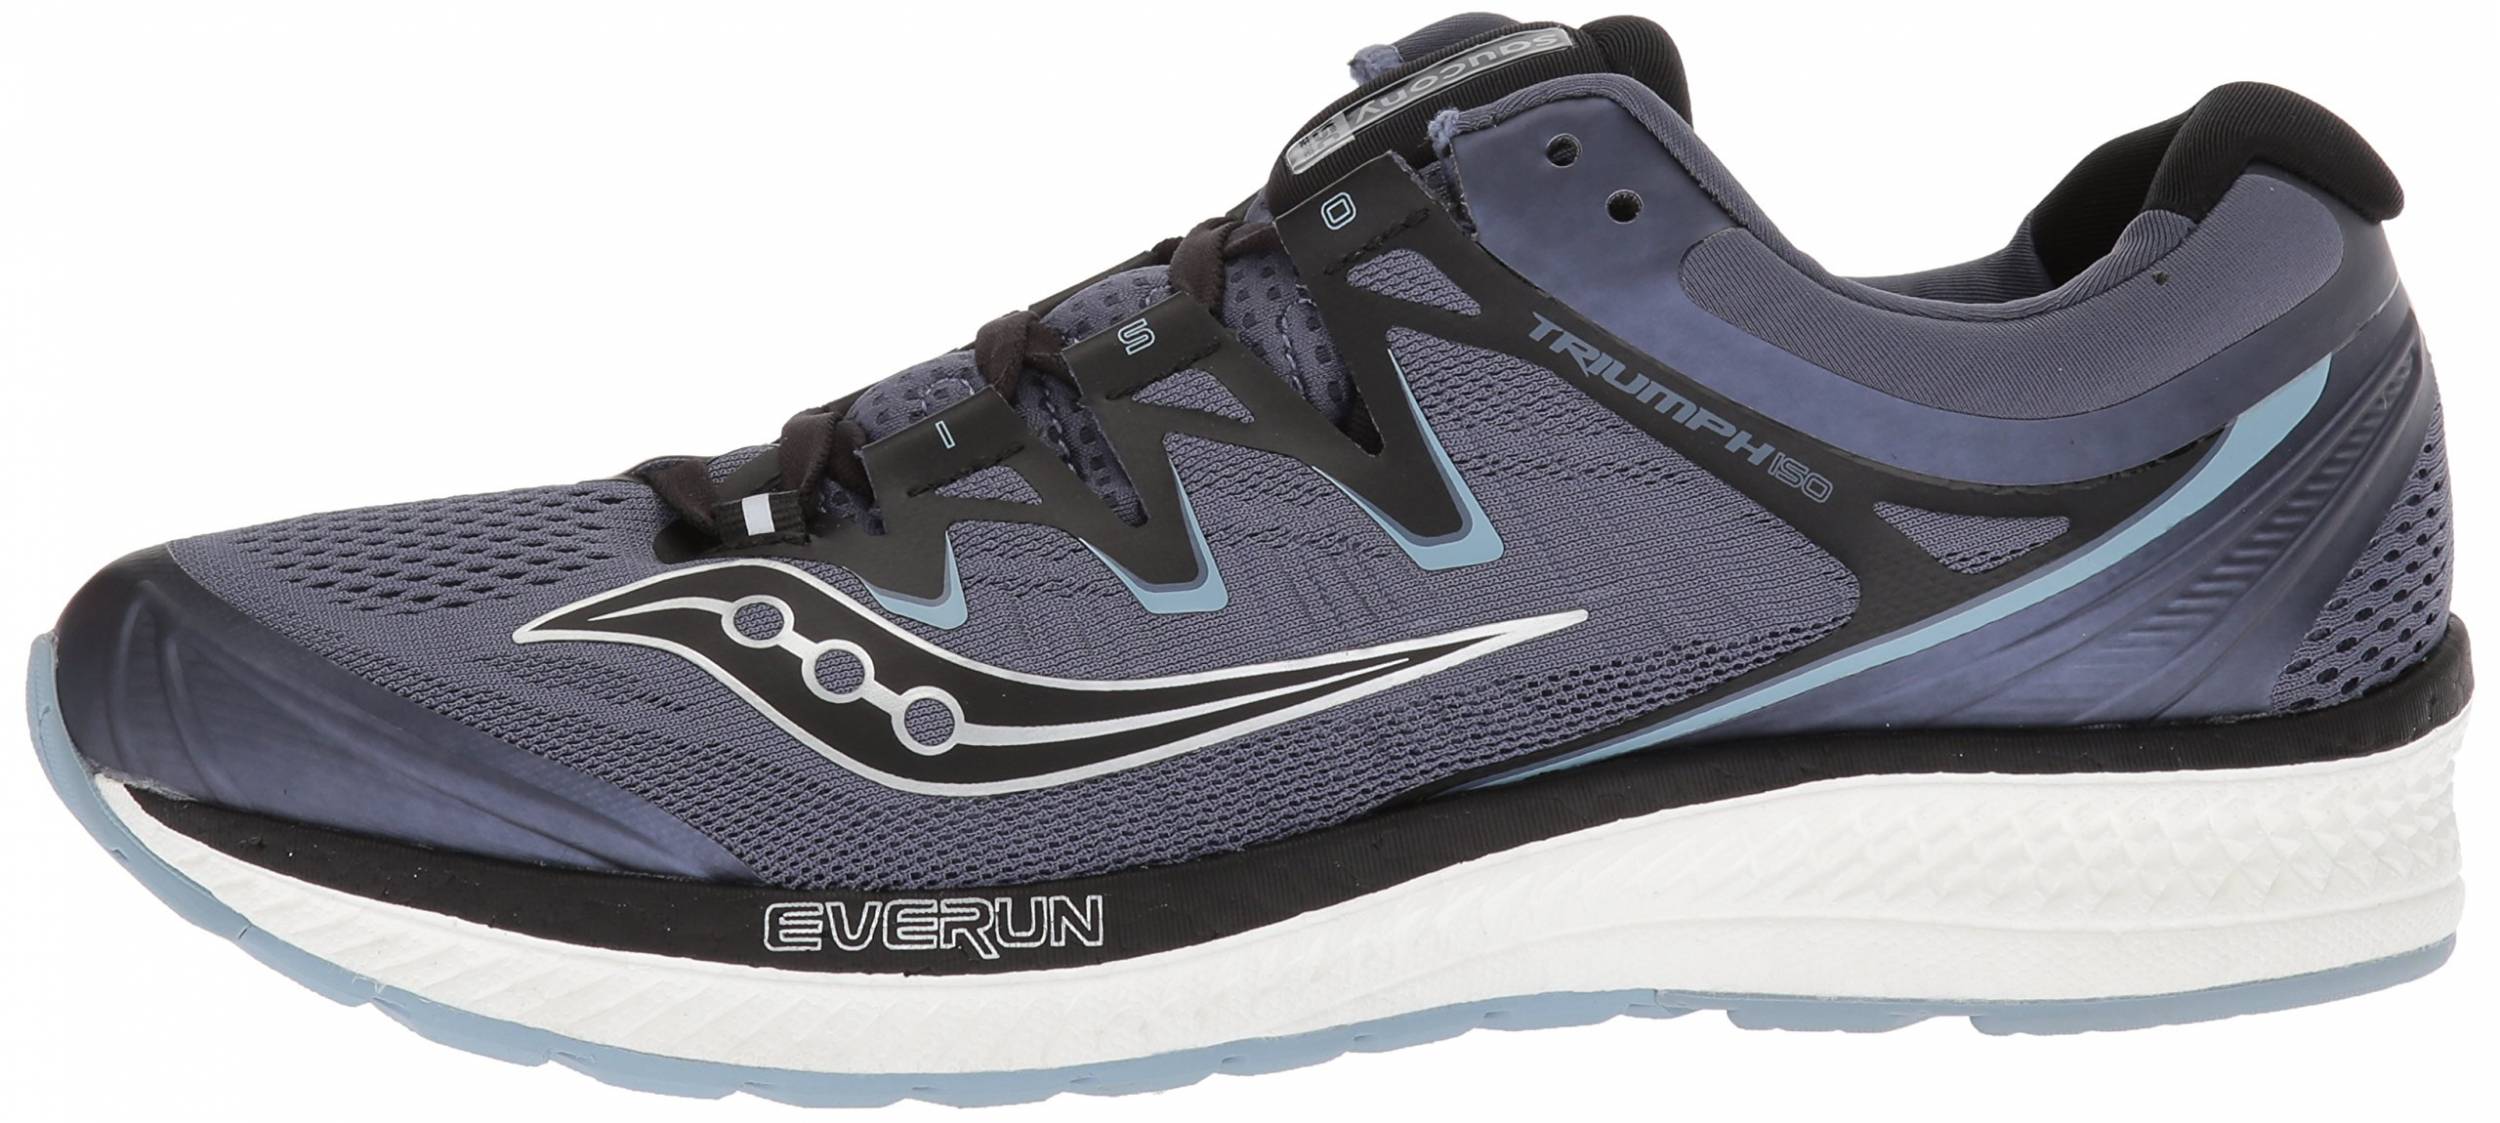 Save 27% on Wide Saucony Running Shoes 